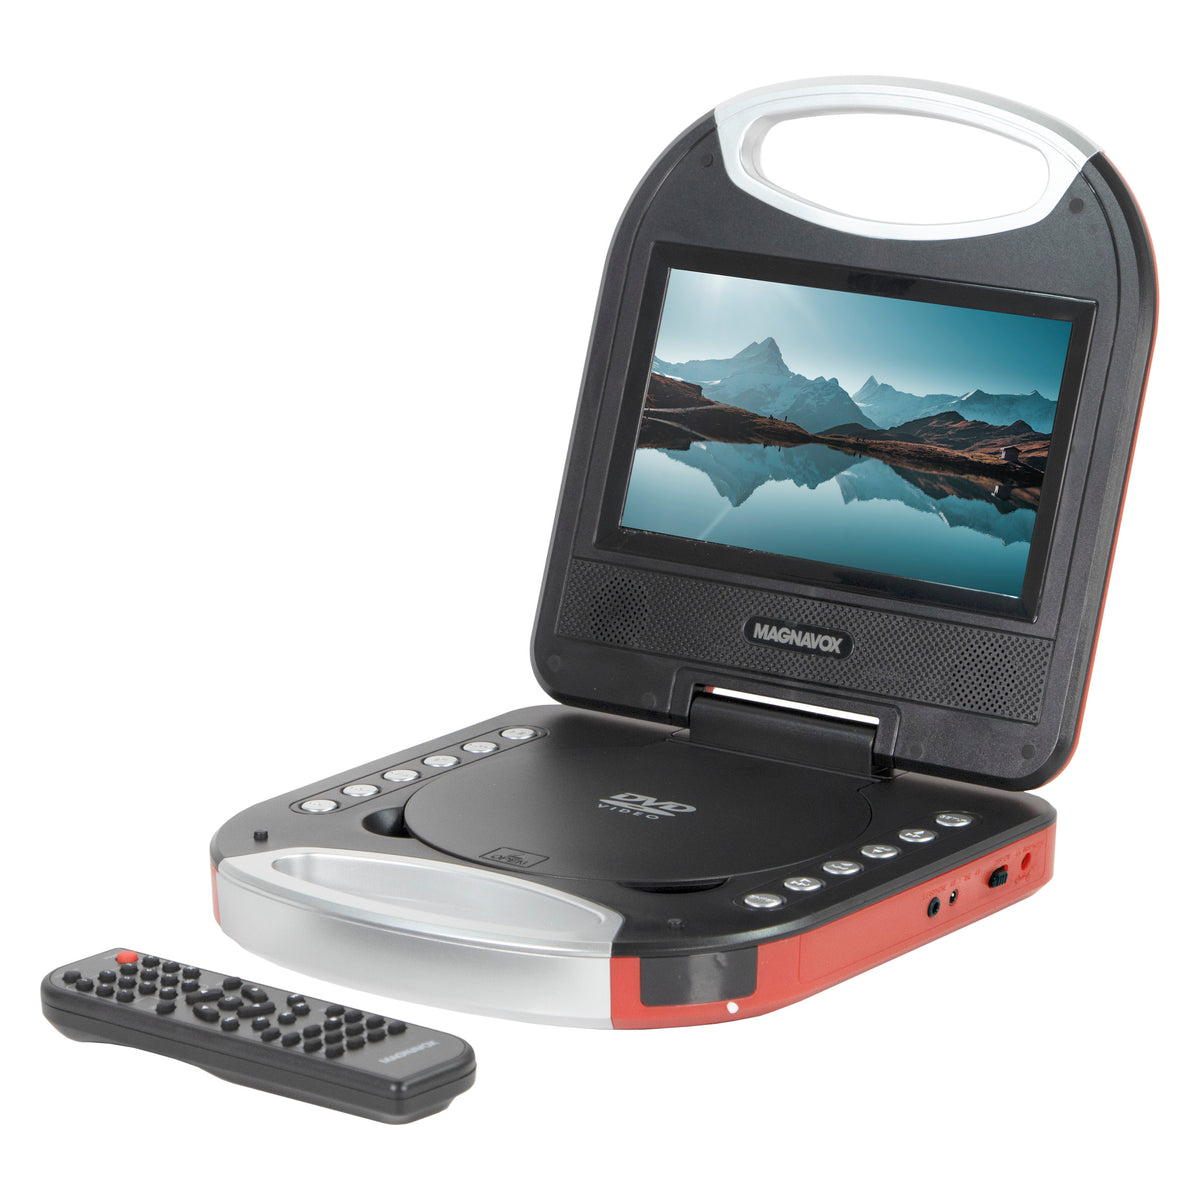 Magnavox MTFT750-RD Portable 7 inch DVD/CD Player with Remote in 